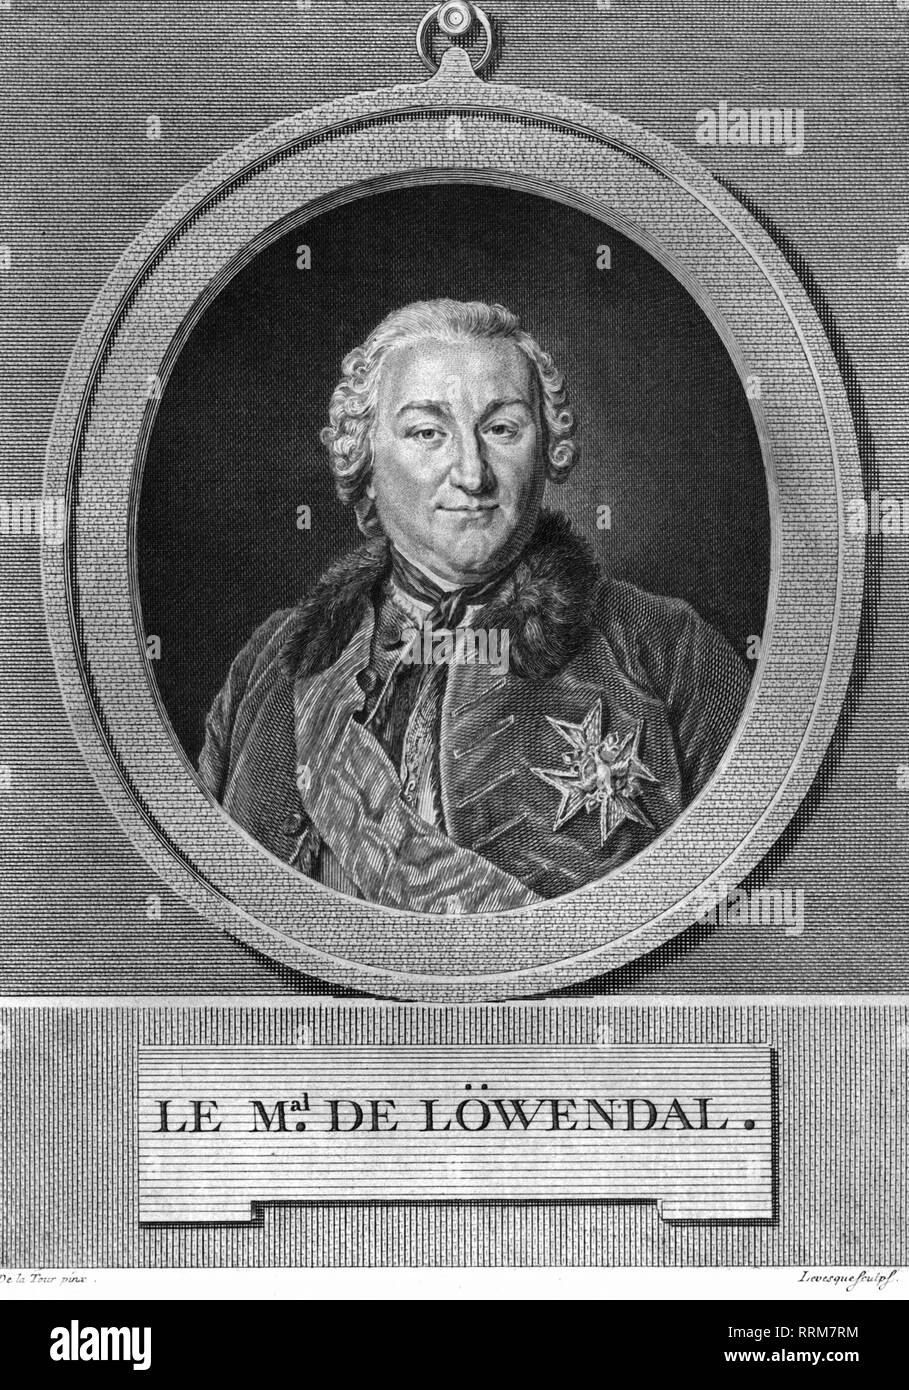 Lowendal, Ulrich von, 1.4.1700 - 27.5.1755, German military leader, Marshal of France, portrait, contemporary copper engraving, after painting by Quentin de La Tour (1704 - 1788), Artist's Copyright has not to be cleared Stock Photo